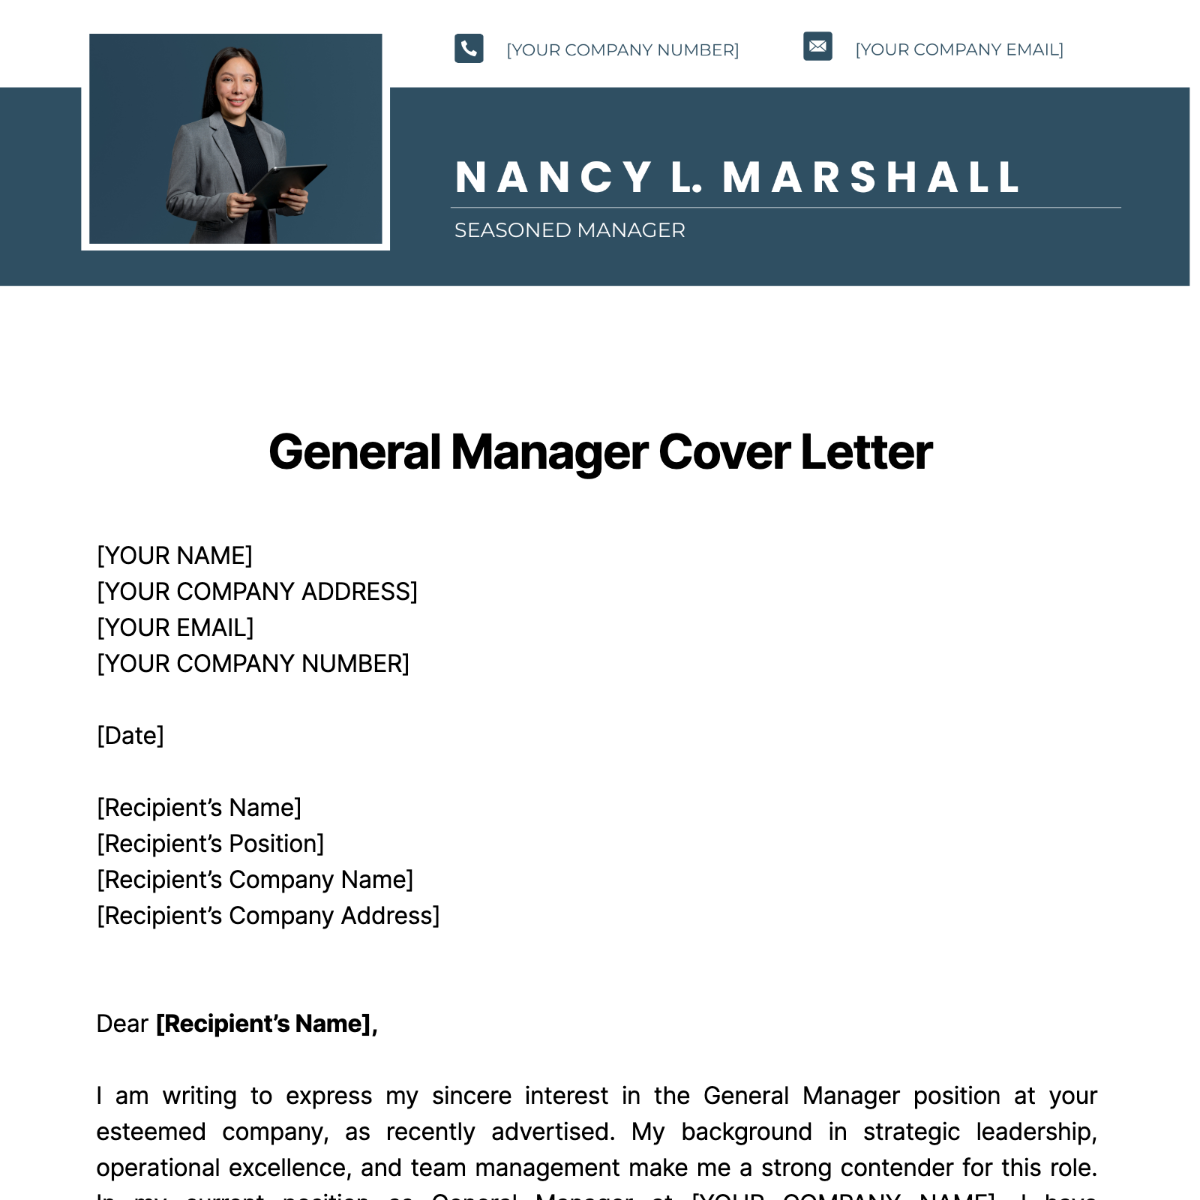 General Manager Cover Letter Template